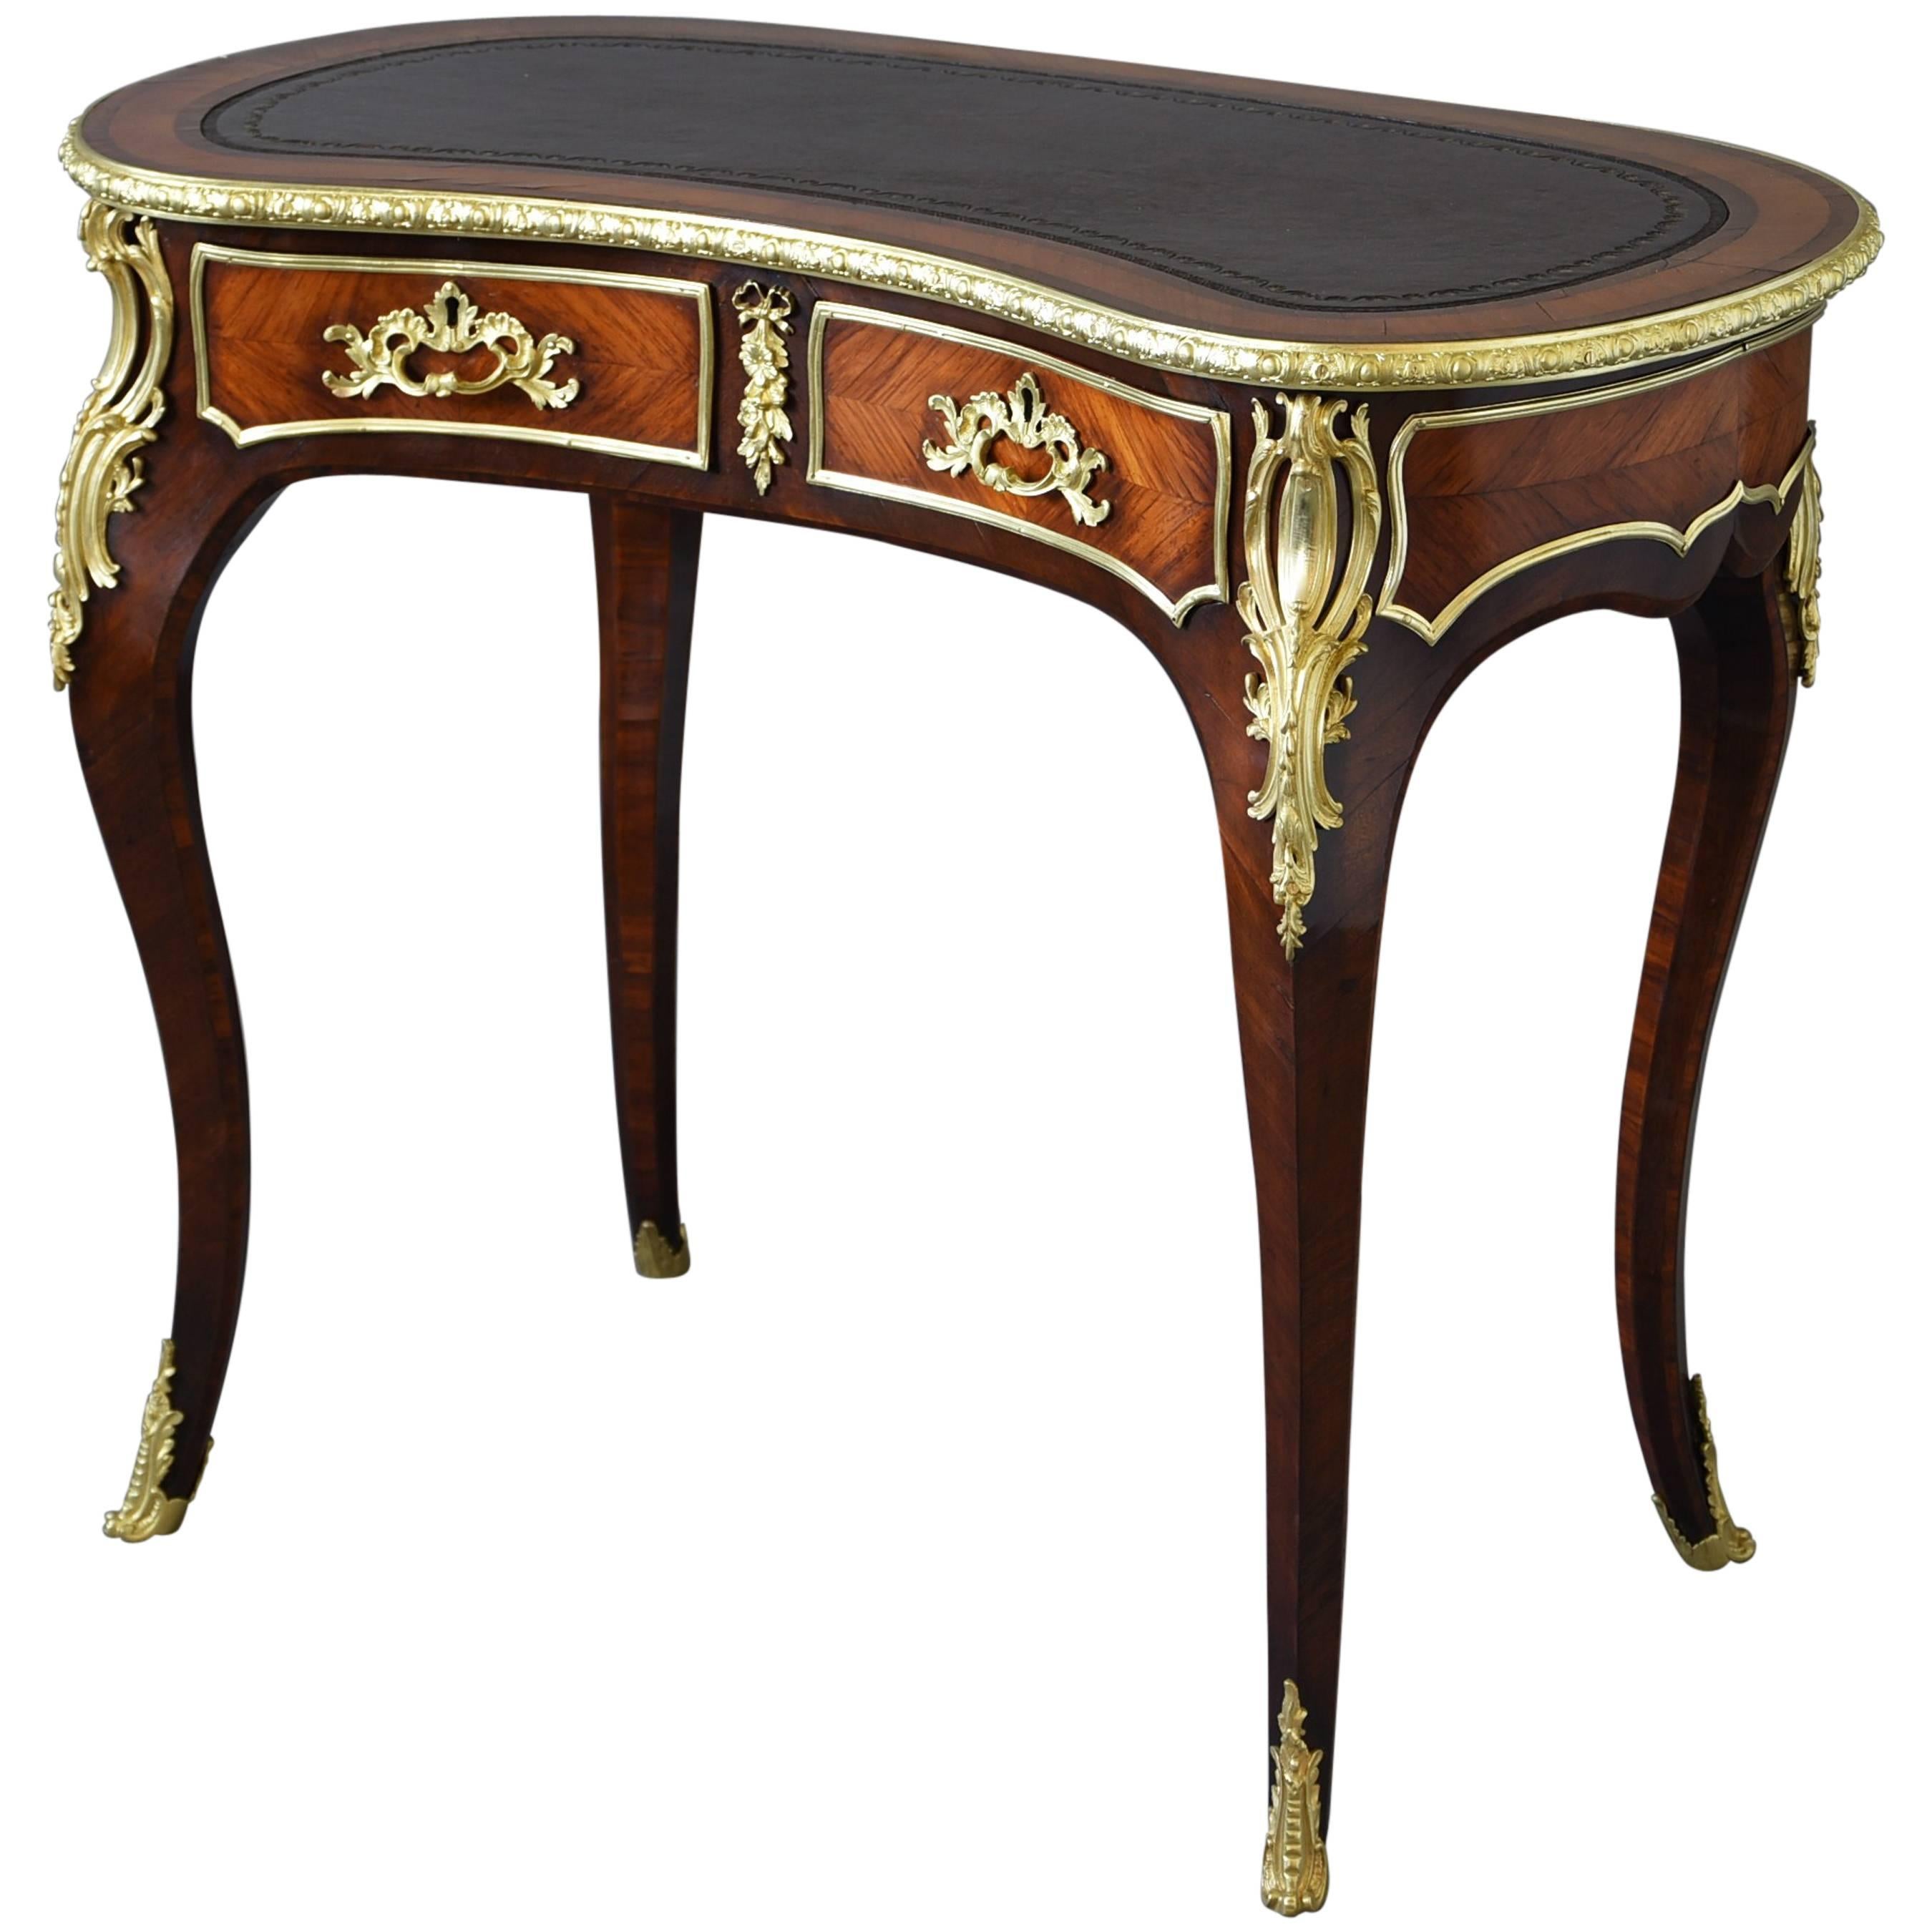 19th Century Kingwood Freestanding Kidney Shaped Ladies Writing Table For Sale